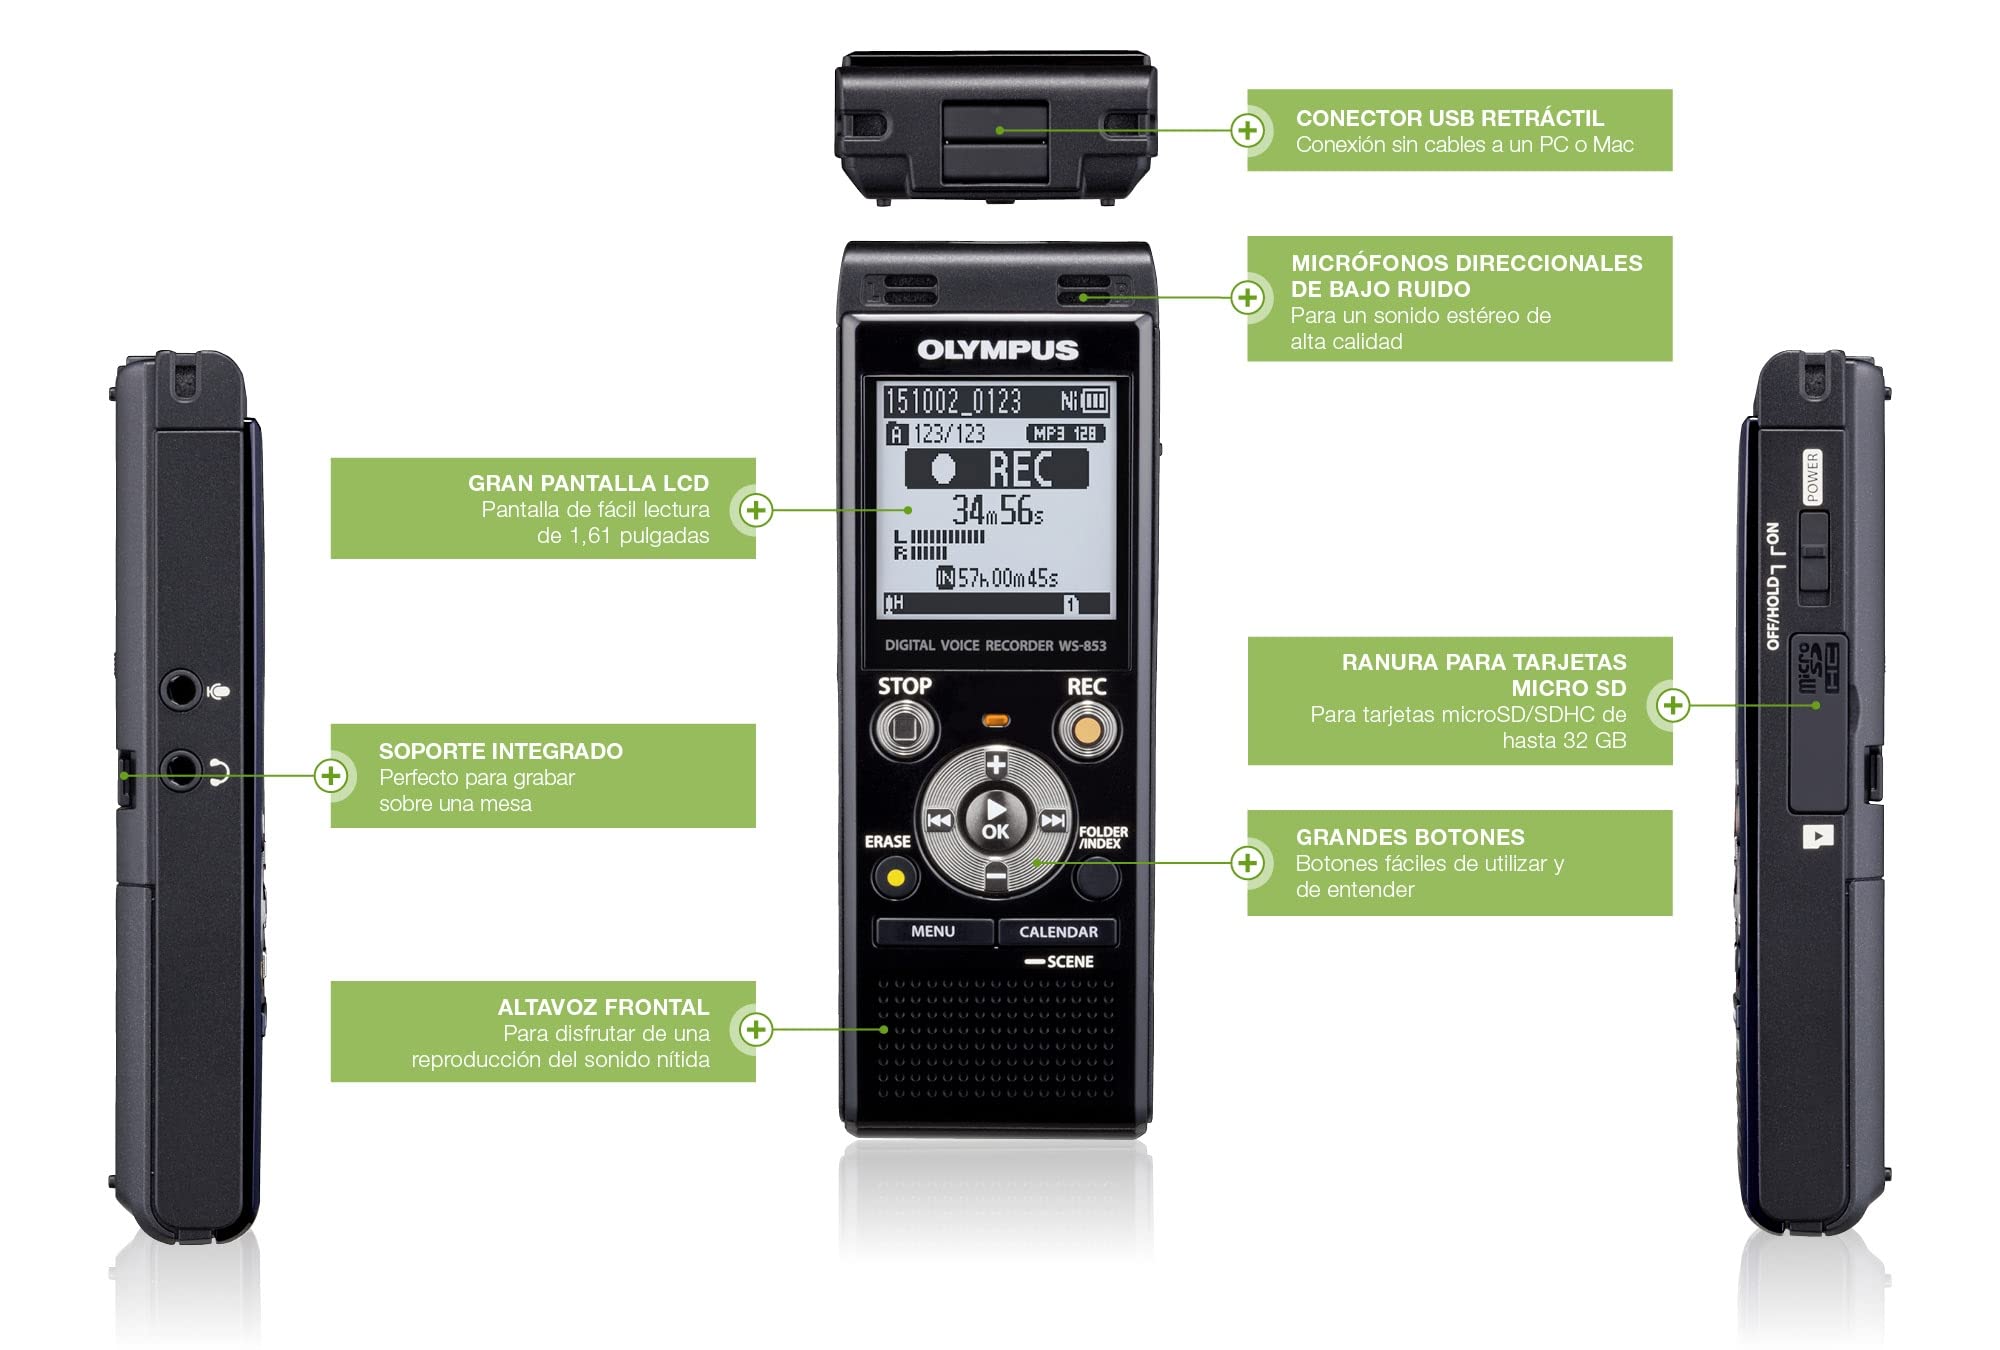 Olympus OM System WS-883 Digital Voice Recorder, Linear PCM/MP3 Recording Formats, USB Direct, 8gb Playback Speed and Volume Adjust, File Index, Erase Selected Files